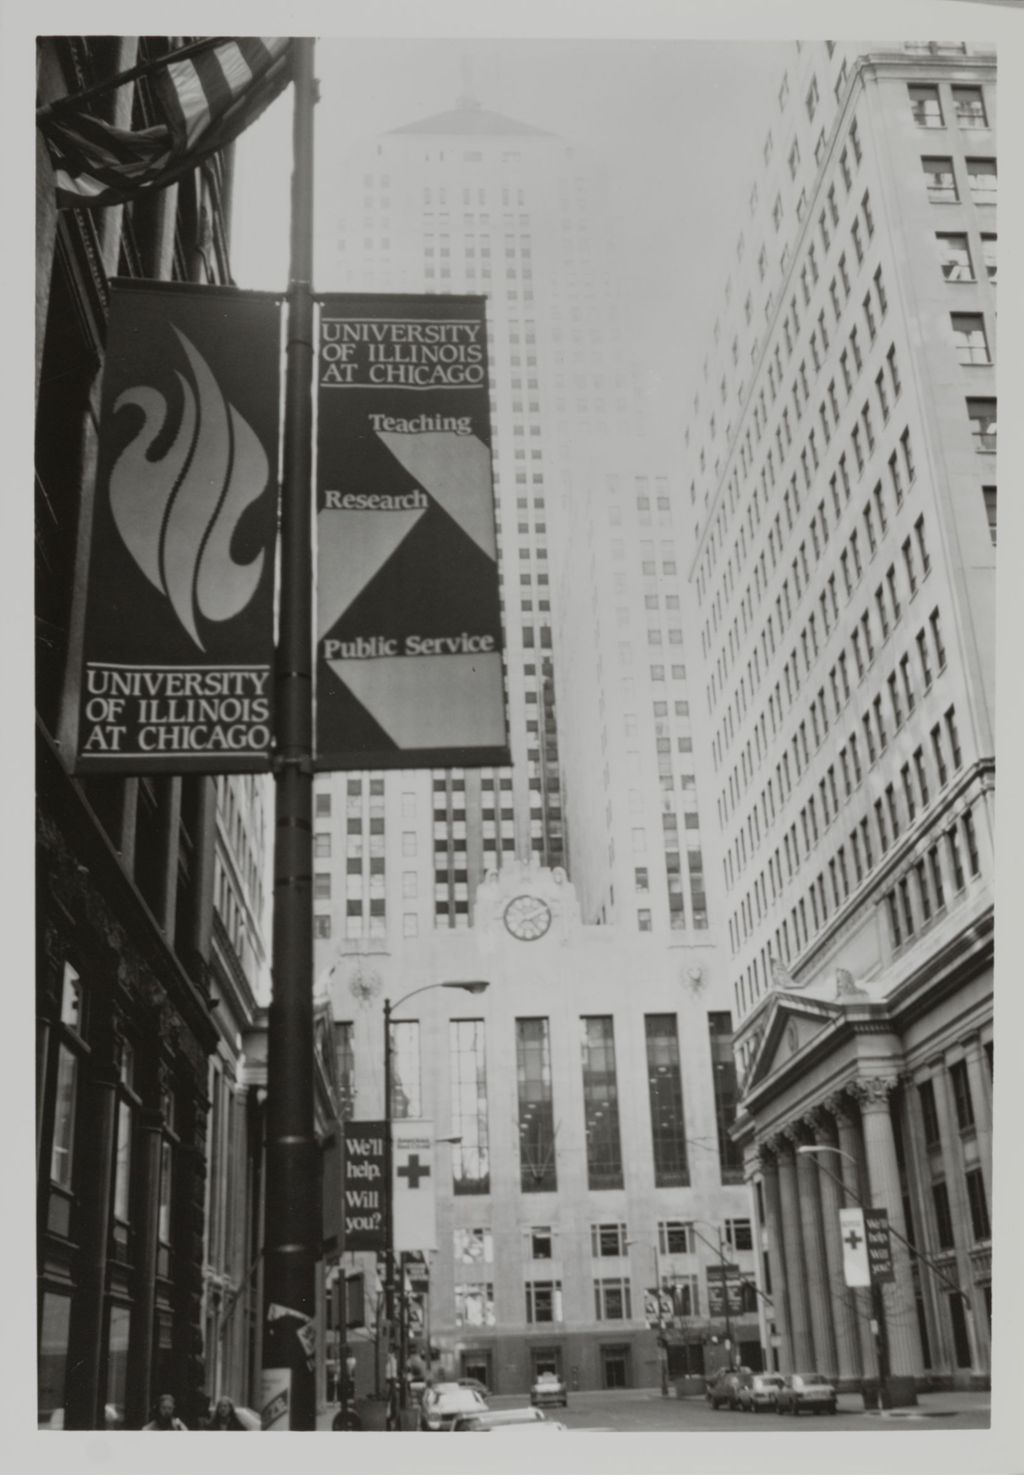 Miniature of Banner for UIC in front of the Chicago Board of Trade building